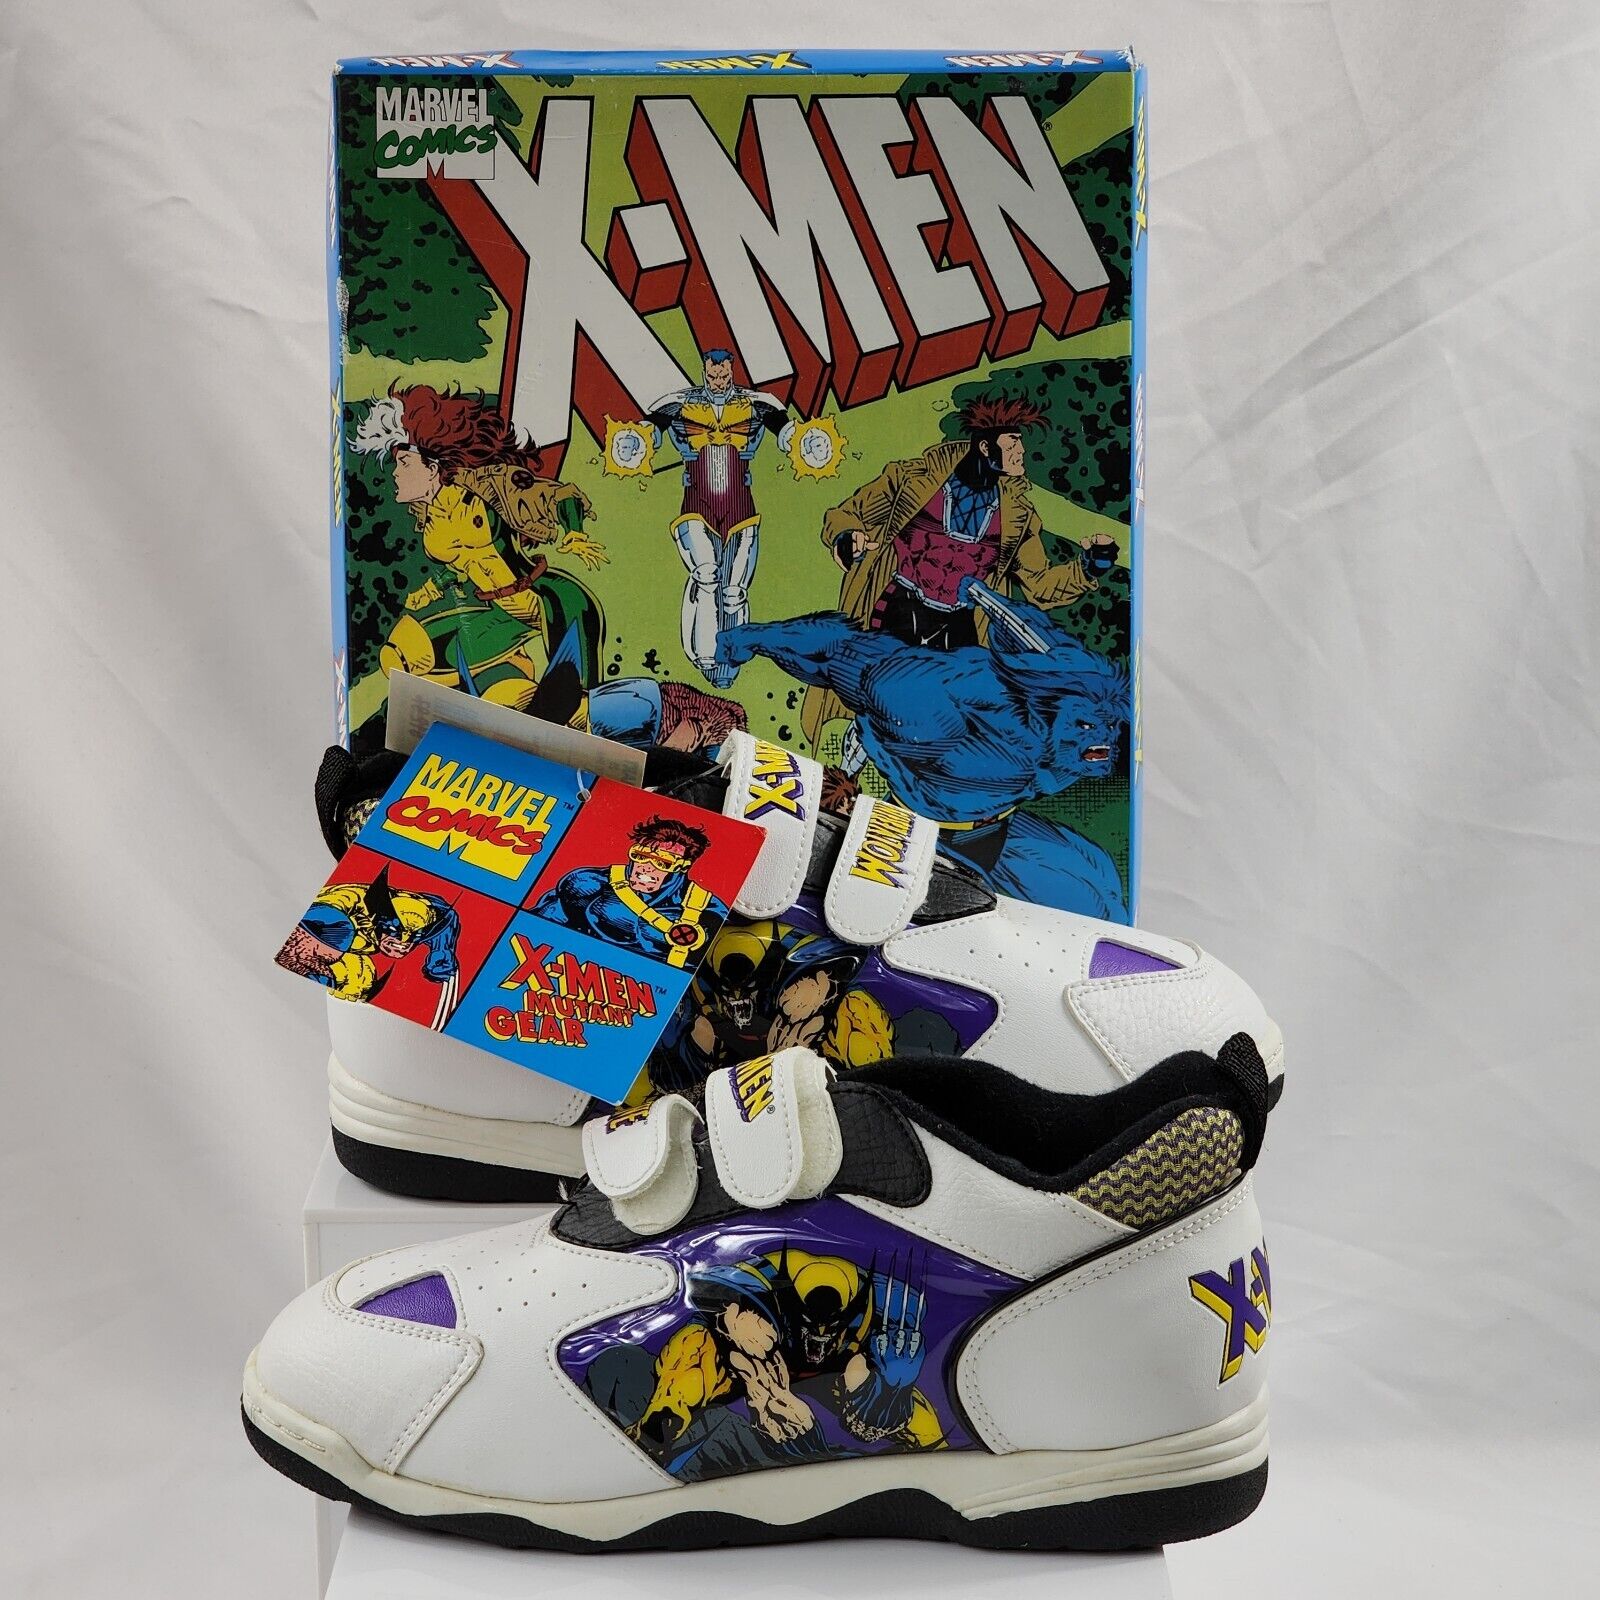 Vtg X-Men Wolverine Mutant Gear Youth Size 2 Shoes Sneakers Marvel Comics 1993